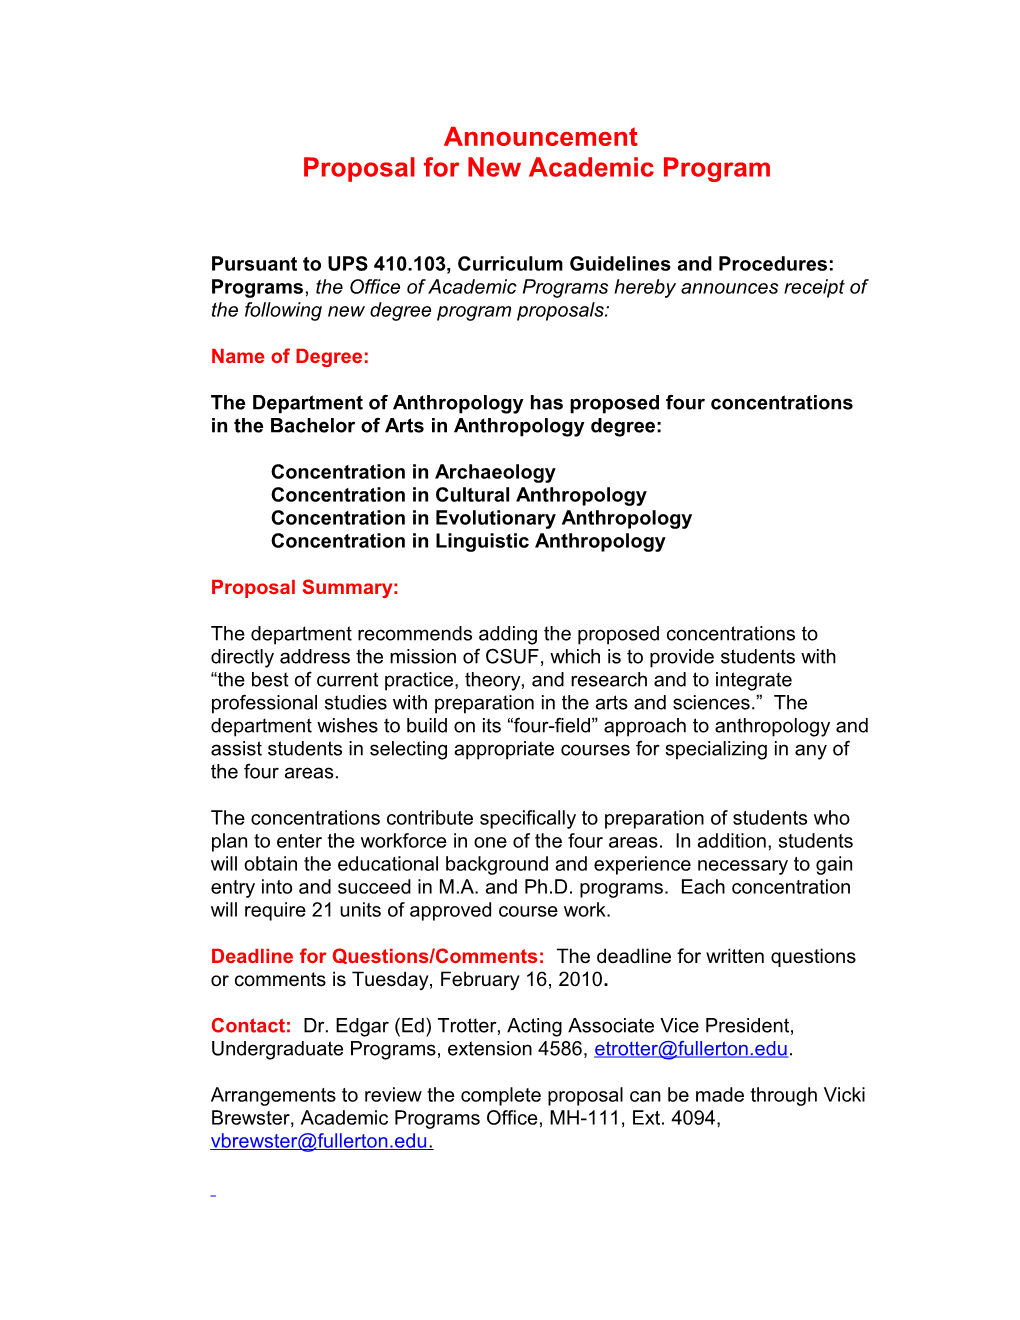 Announcement Proposal for New Academic Program